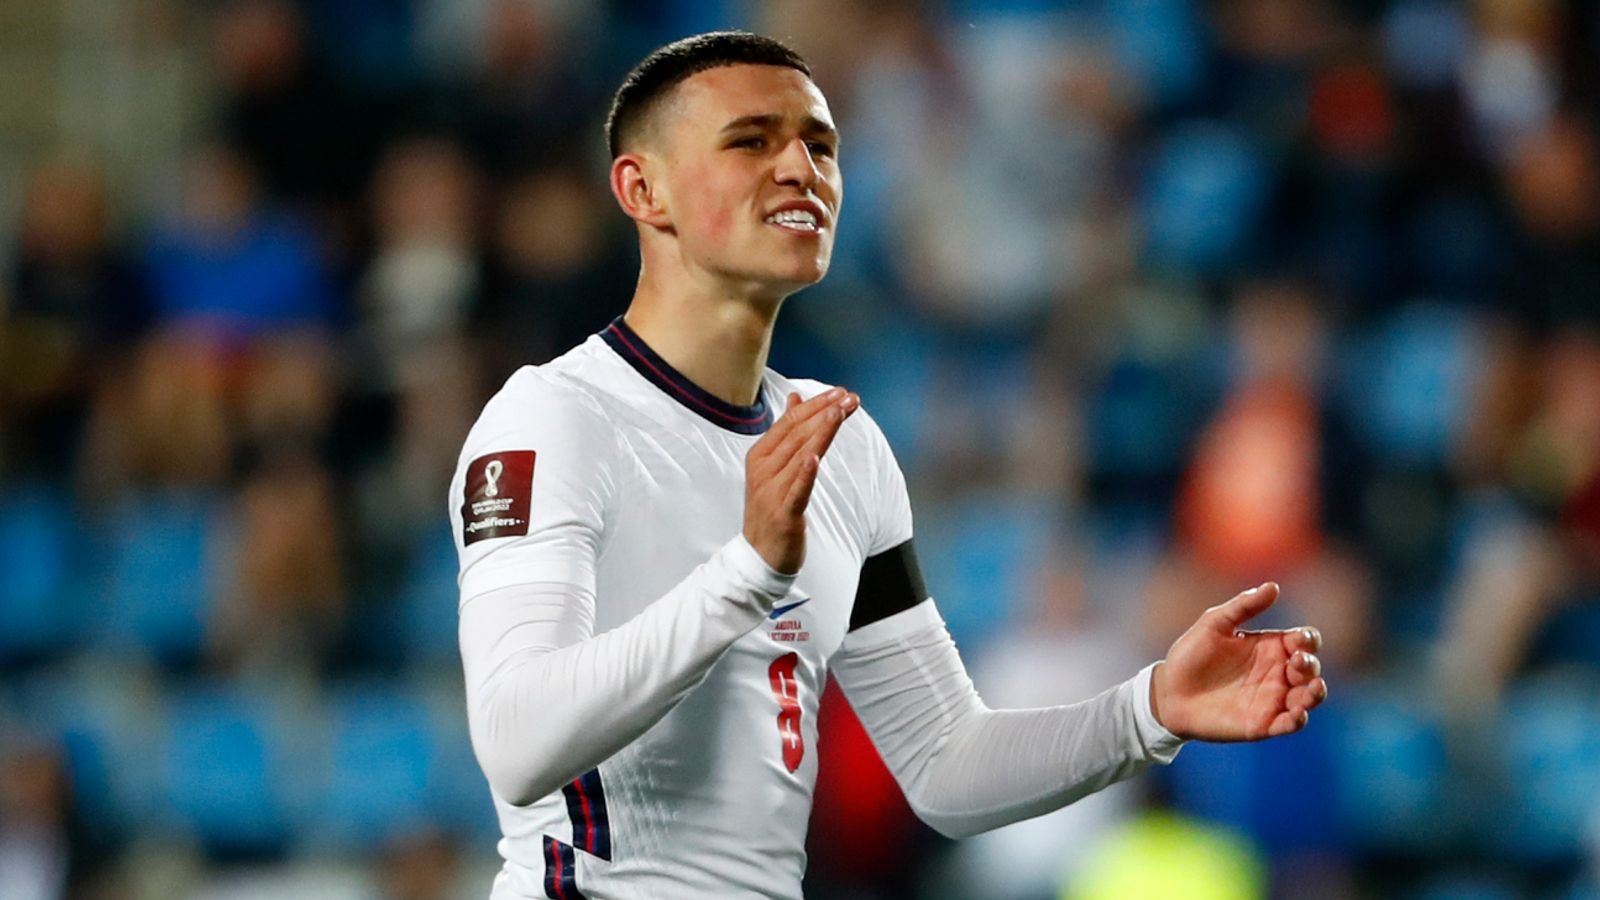 England vs Hungary: The Three Lions may be getting closer to the World Cup finals, but will Phil Foden keep his place in midfield?